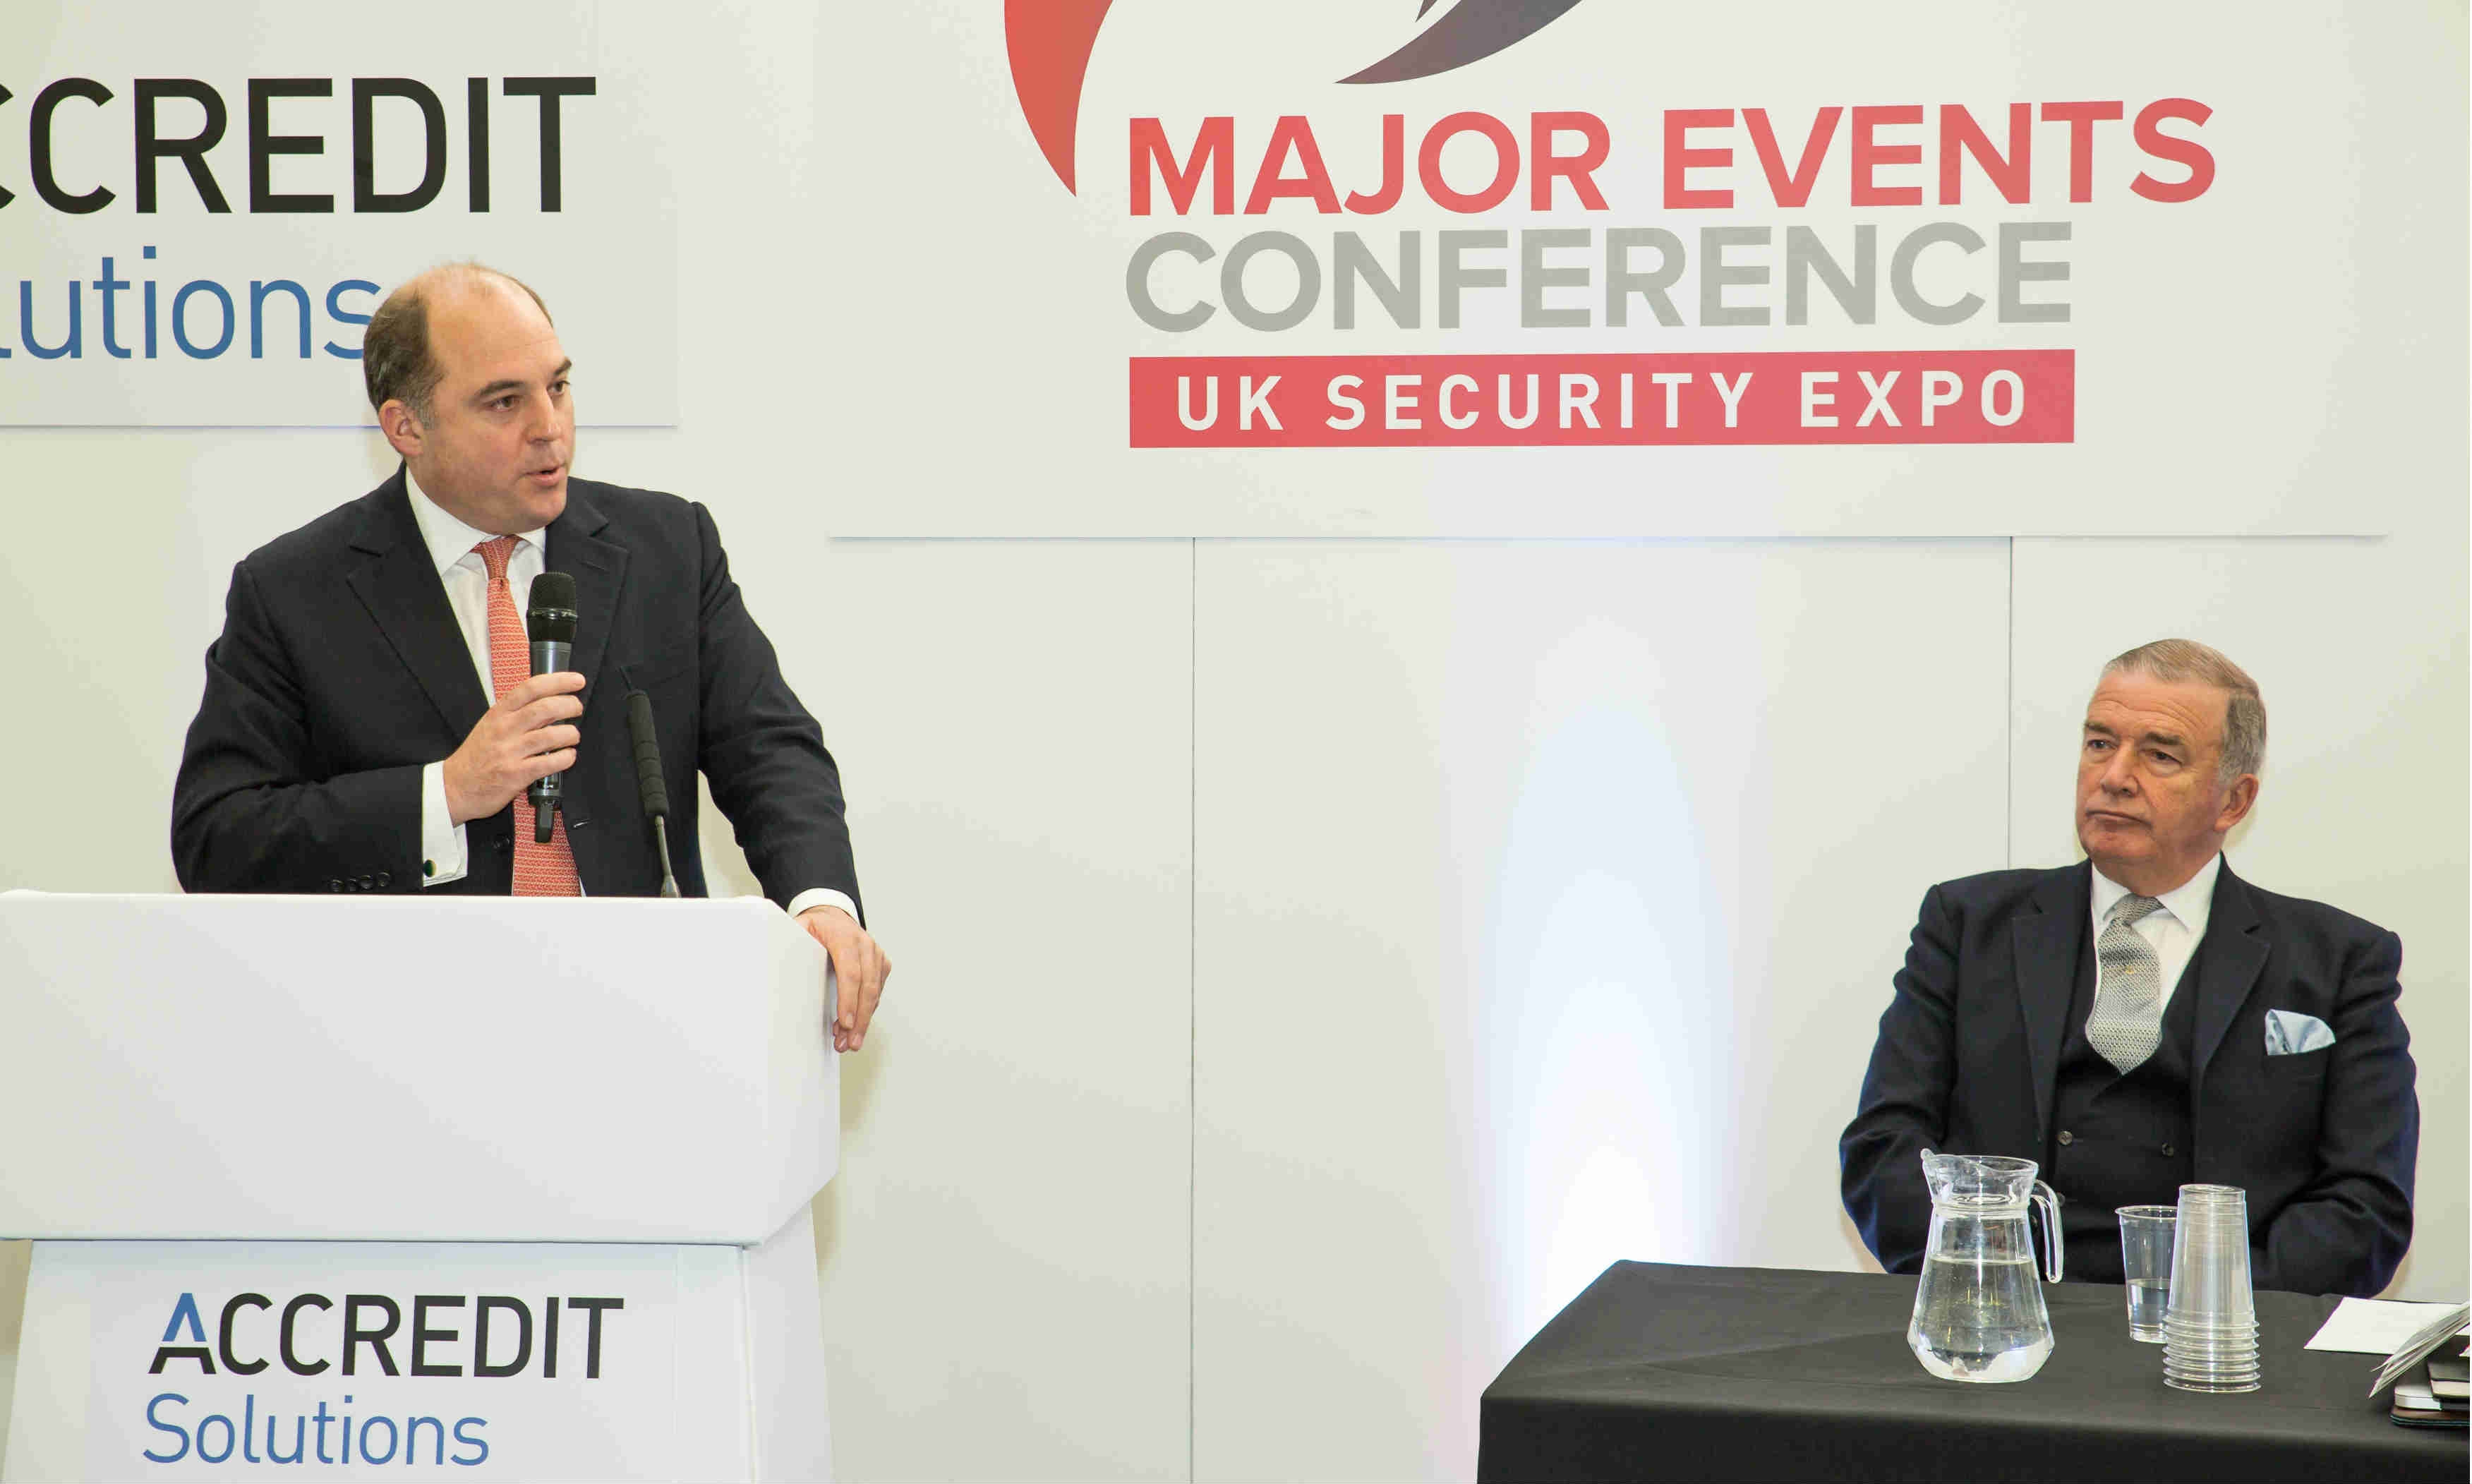 UK Security Minister, Ben Wallace MP confirmed to speak at UK Security Expo 2017